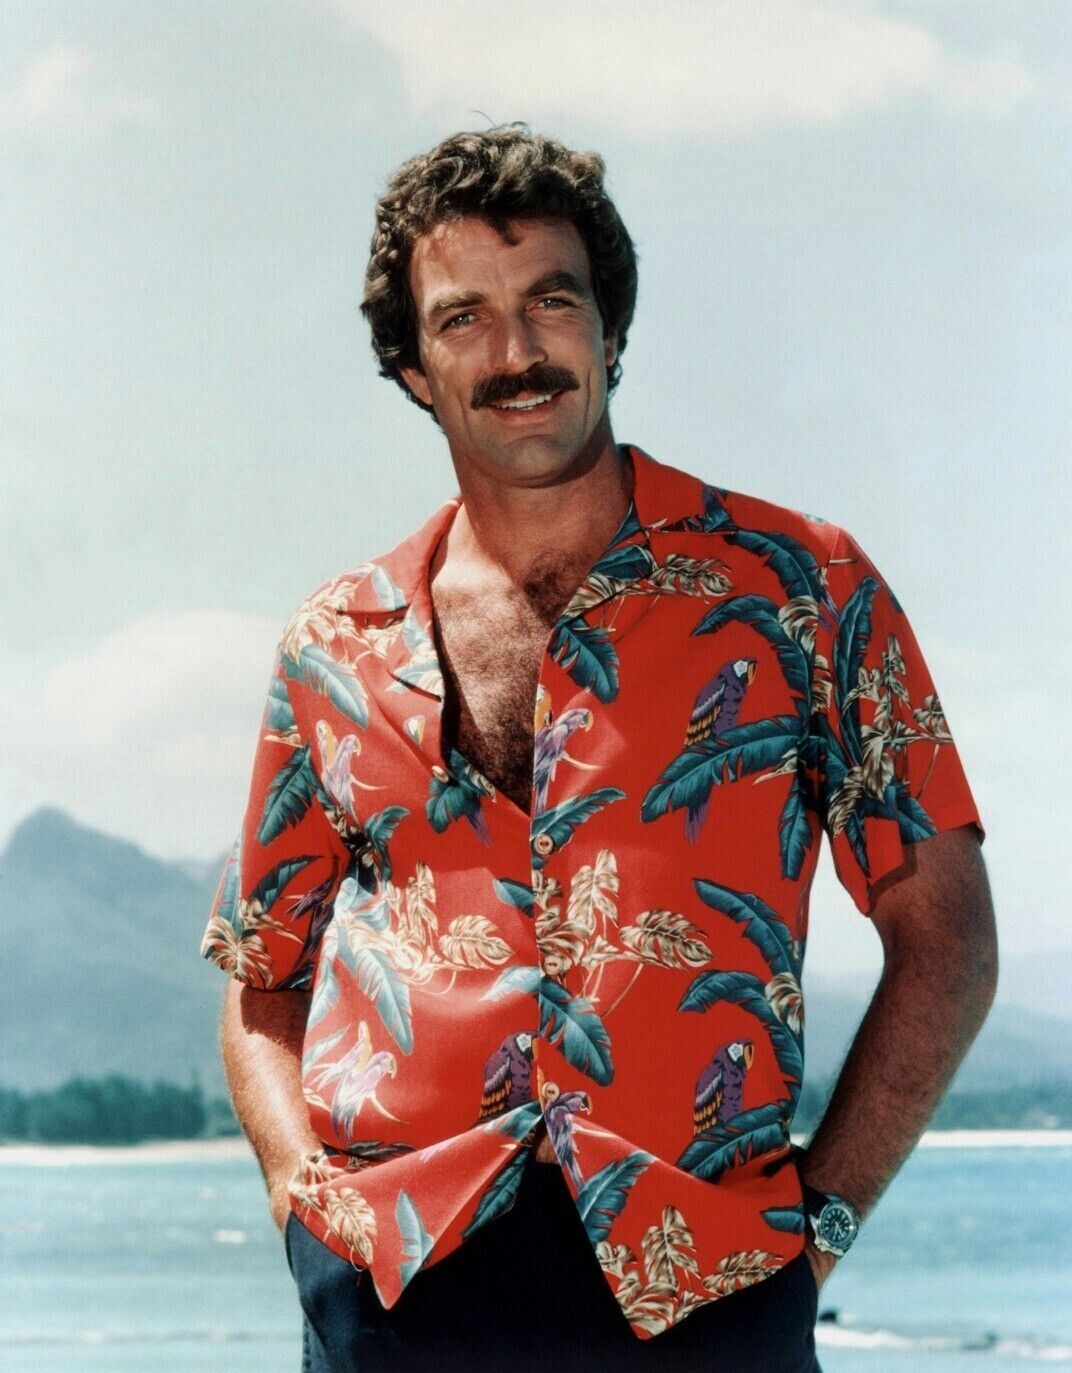 Actor Tom Selleck in TV Show Magnum P.I. Publicity Picture Poster Photo 5x7